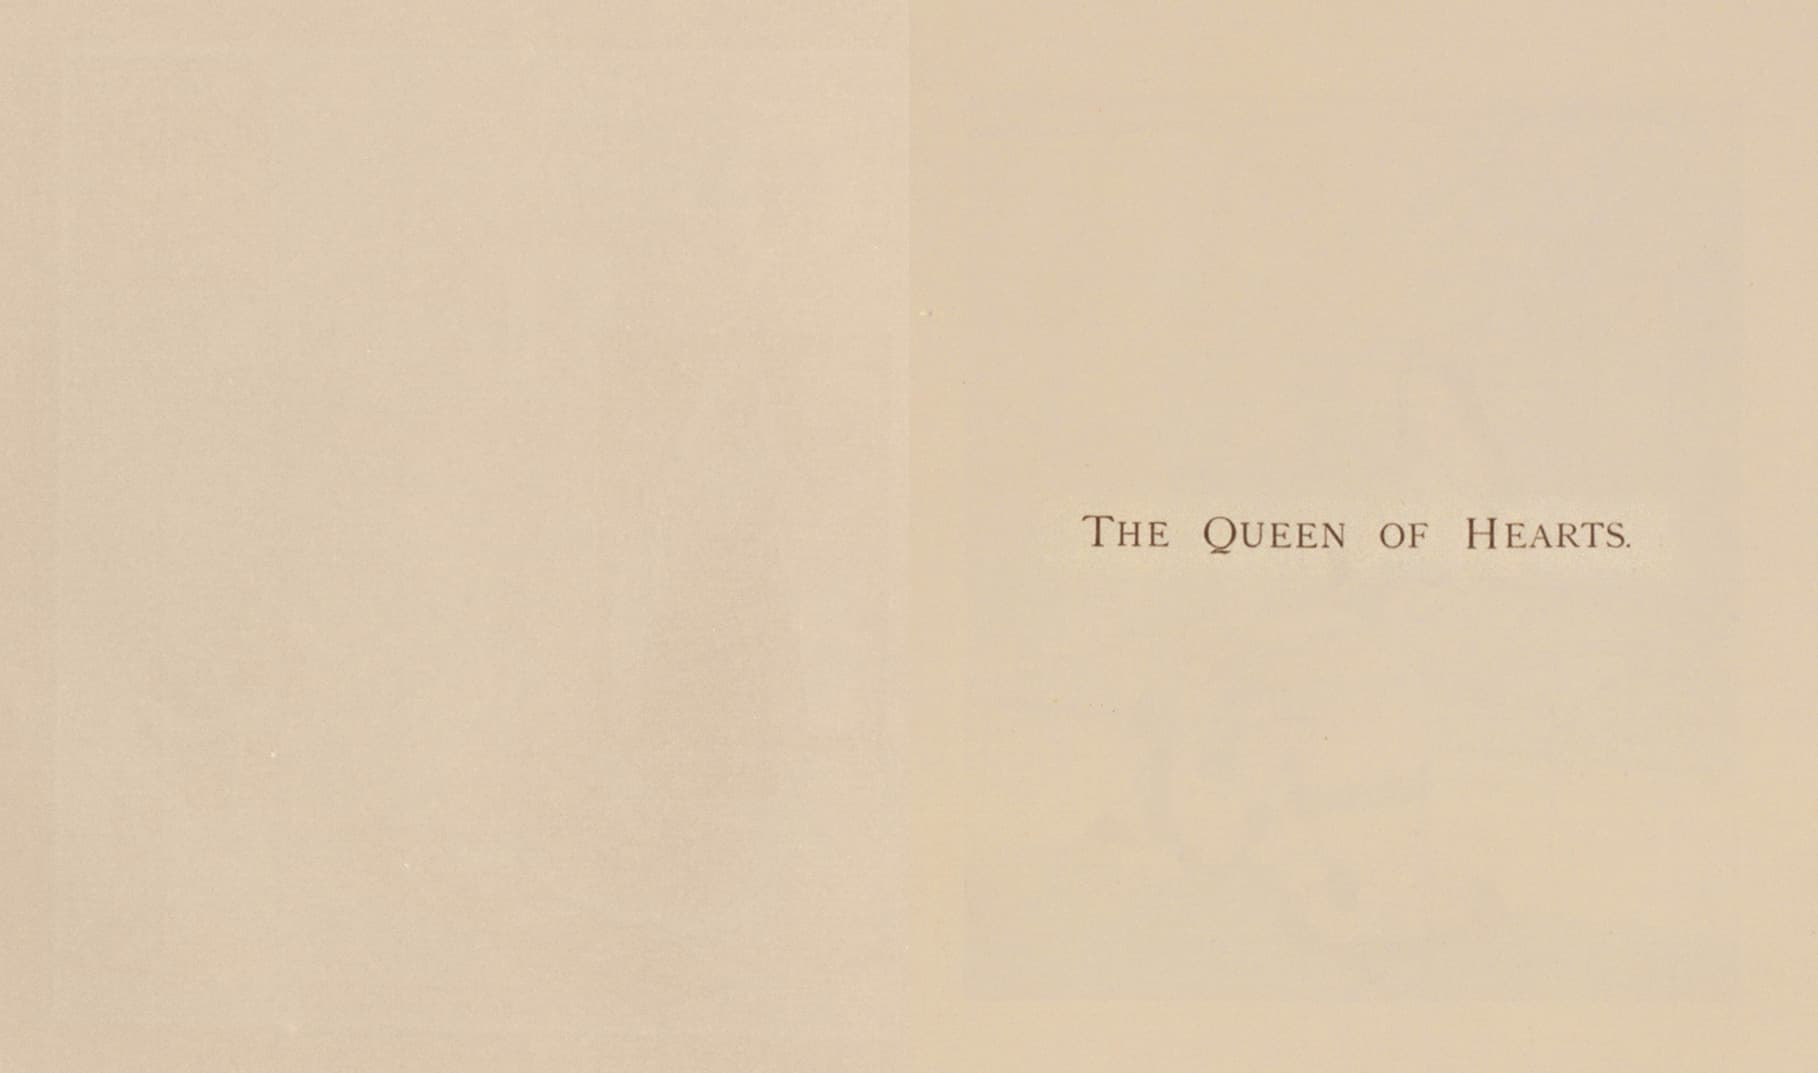 page 1 of The Queen of Hearts (page 220-221 of The Complete Collection of PICTURES and SONGS)